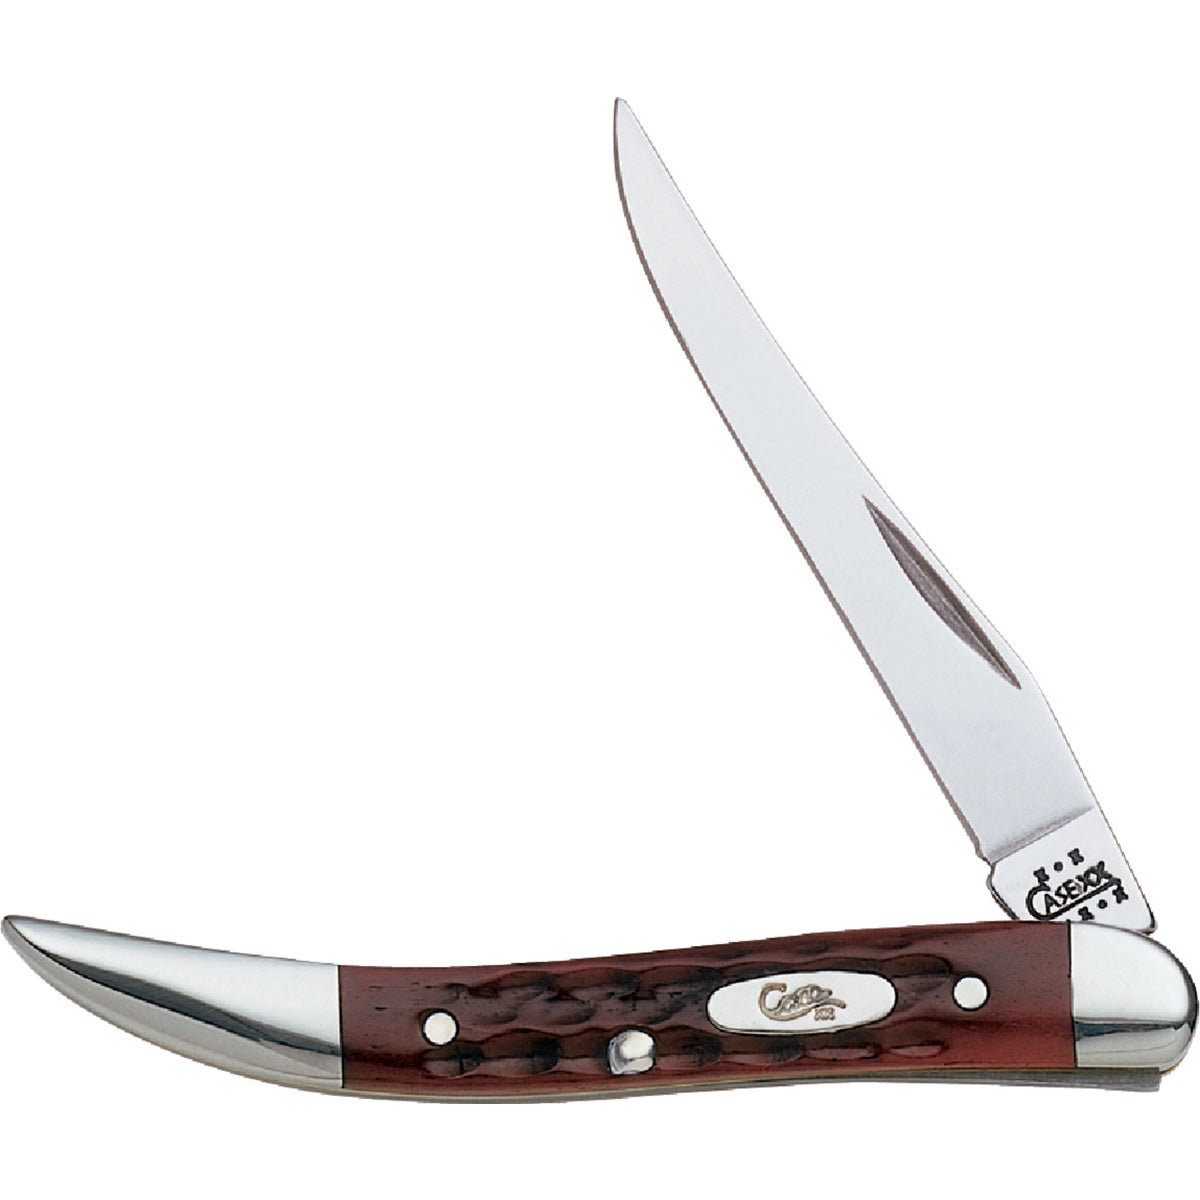 Item 826197, Small Texas Toothpick folding knife featuring a long clip blade with a 